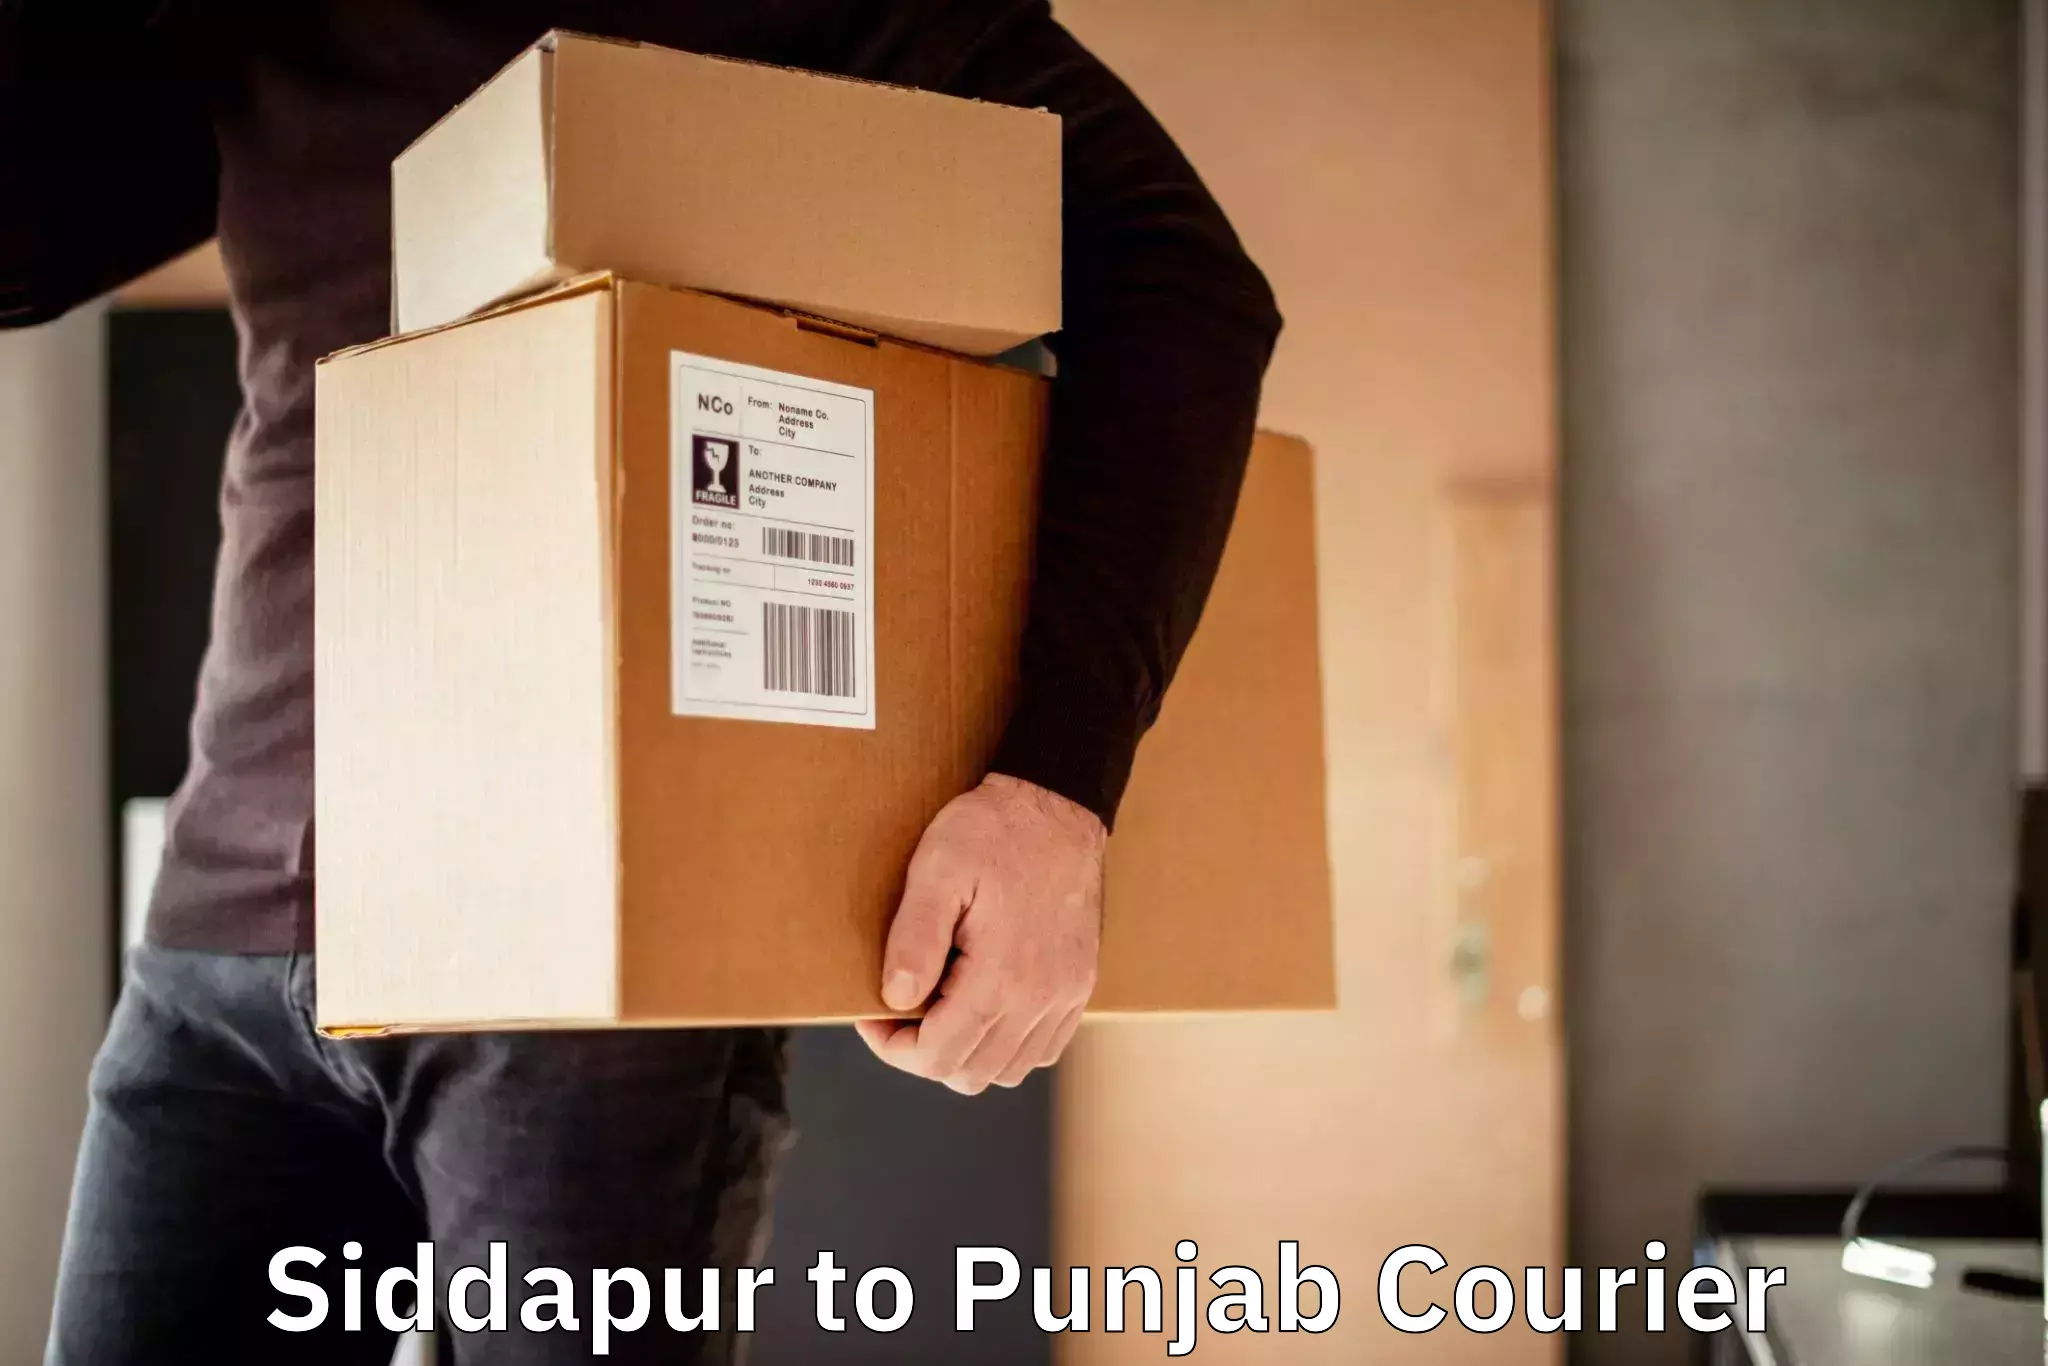 Professional parcel services Siddapur to Muktsar